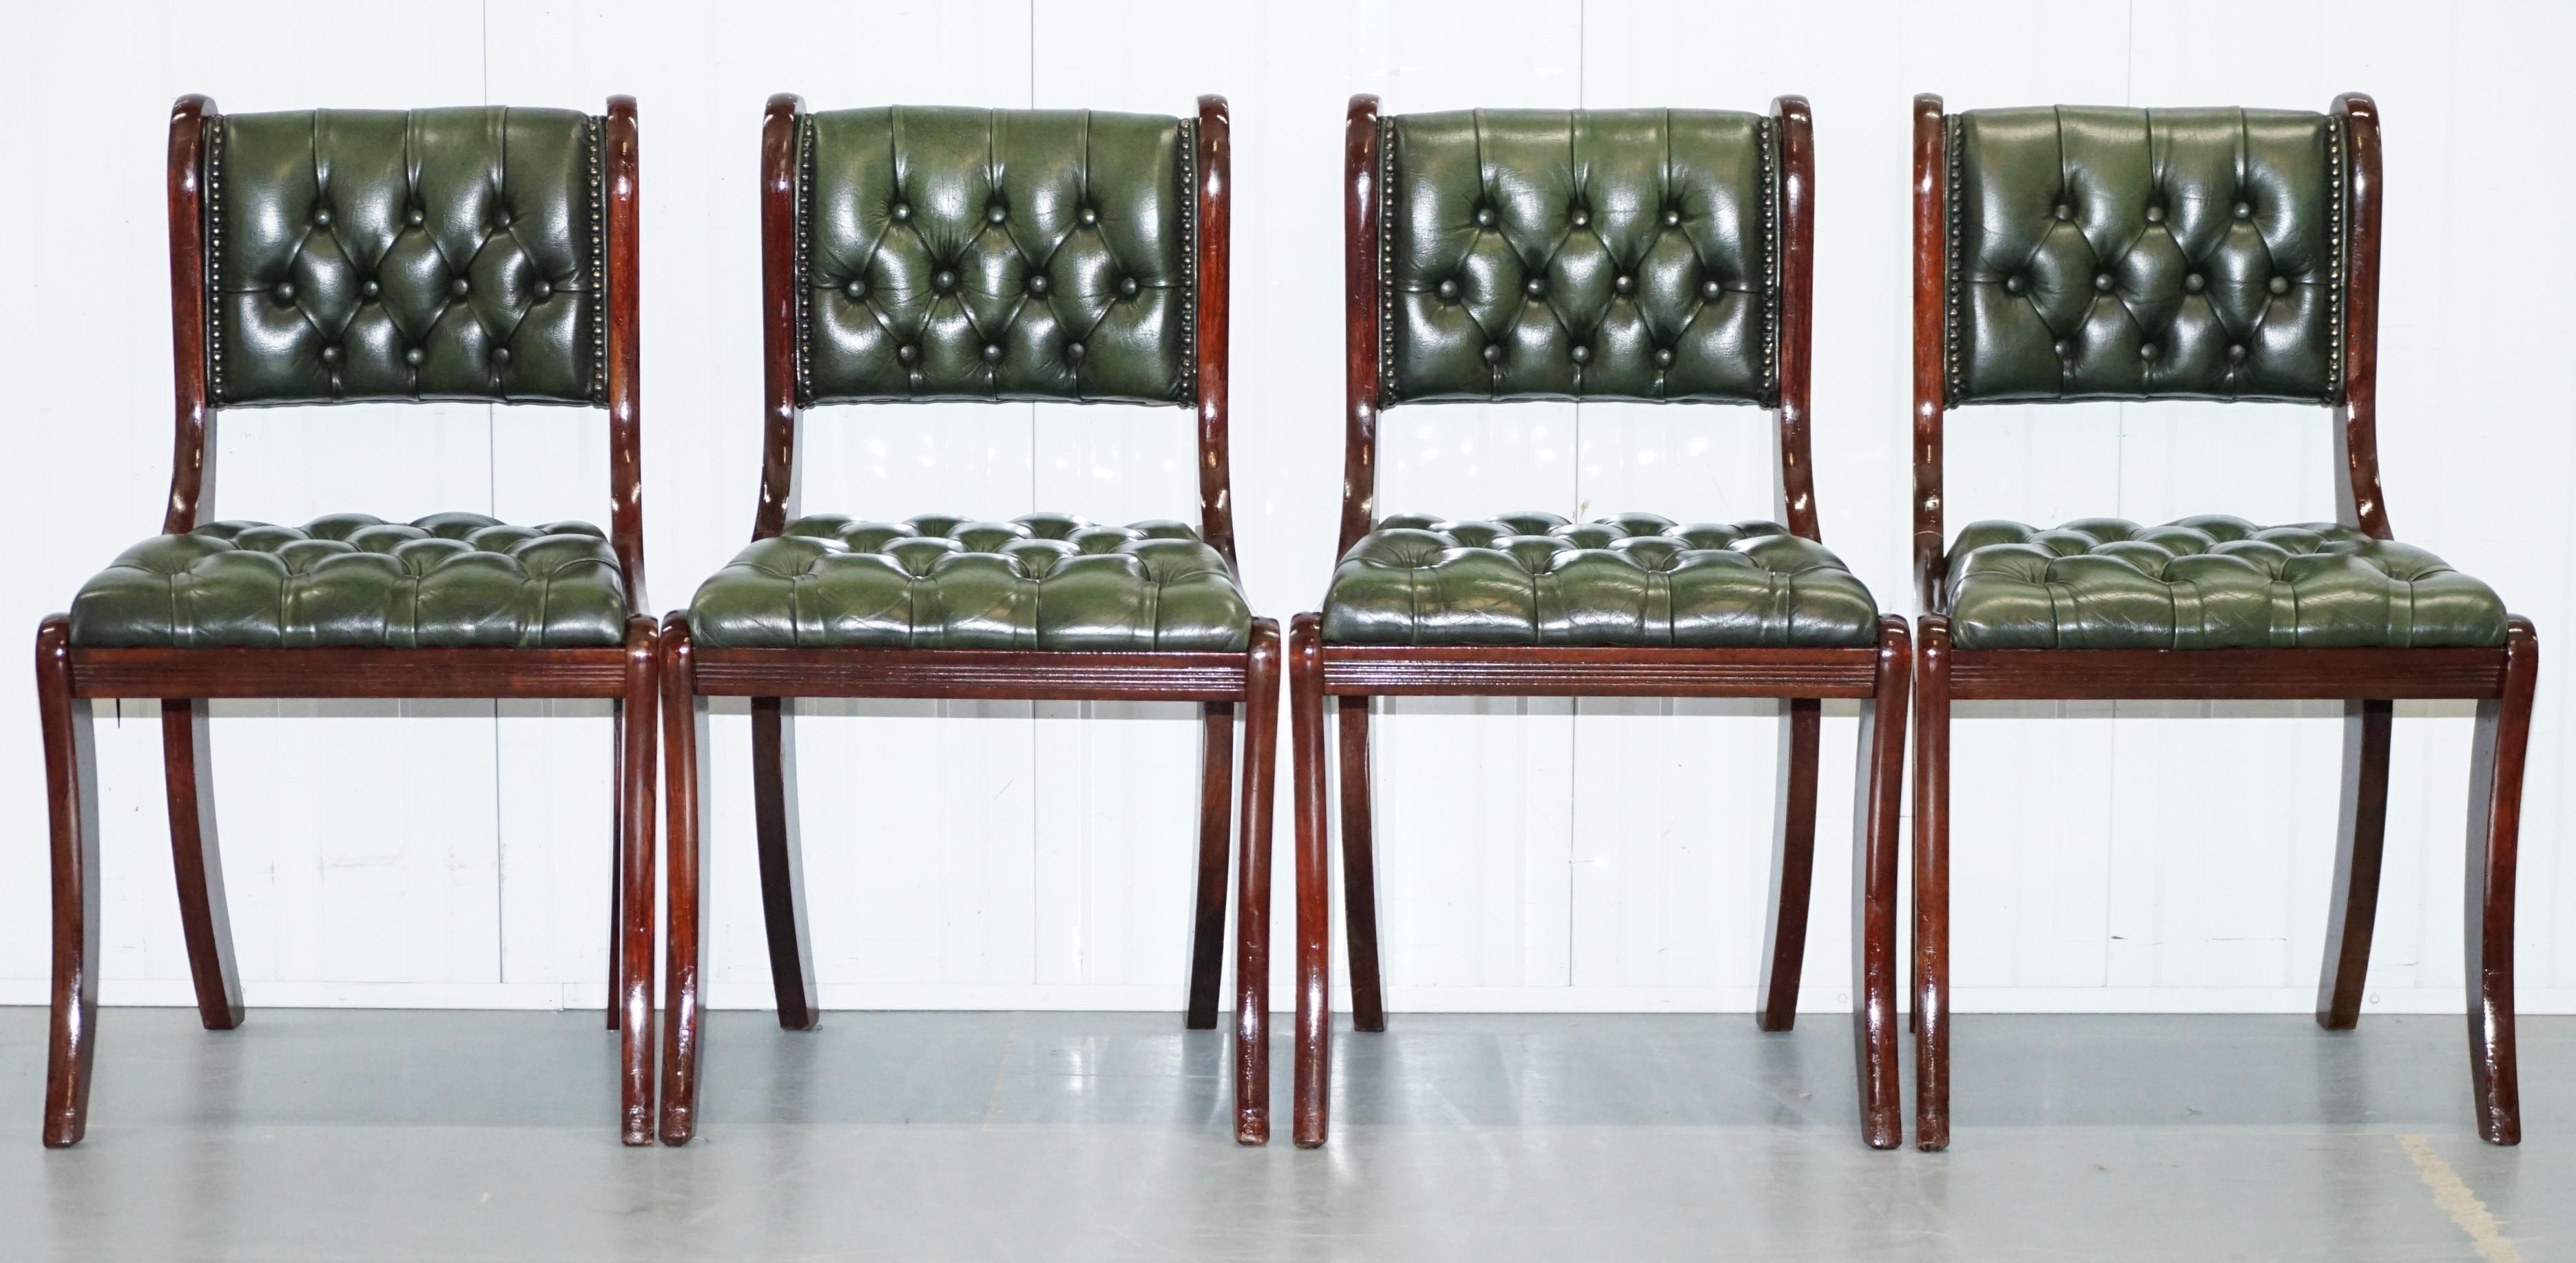 We are delighted to offer for auction this lovely set of 6 original Beresford & Hicks England green Chesterfield leather genuine hide mahogany framed dining chairs.

A lovely solid mahogany set with nice vintage Chesterfield buttoned green leather